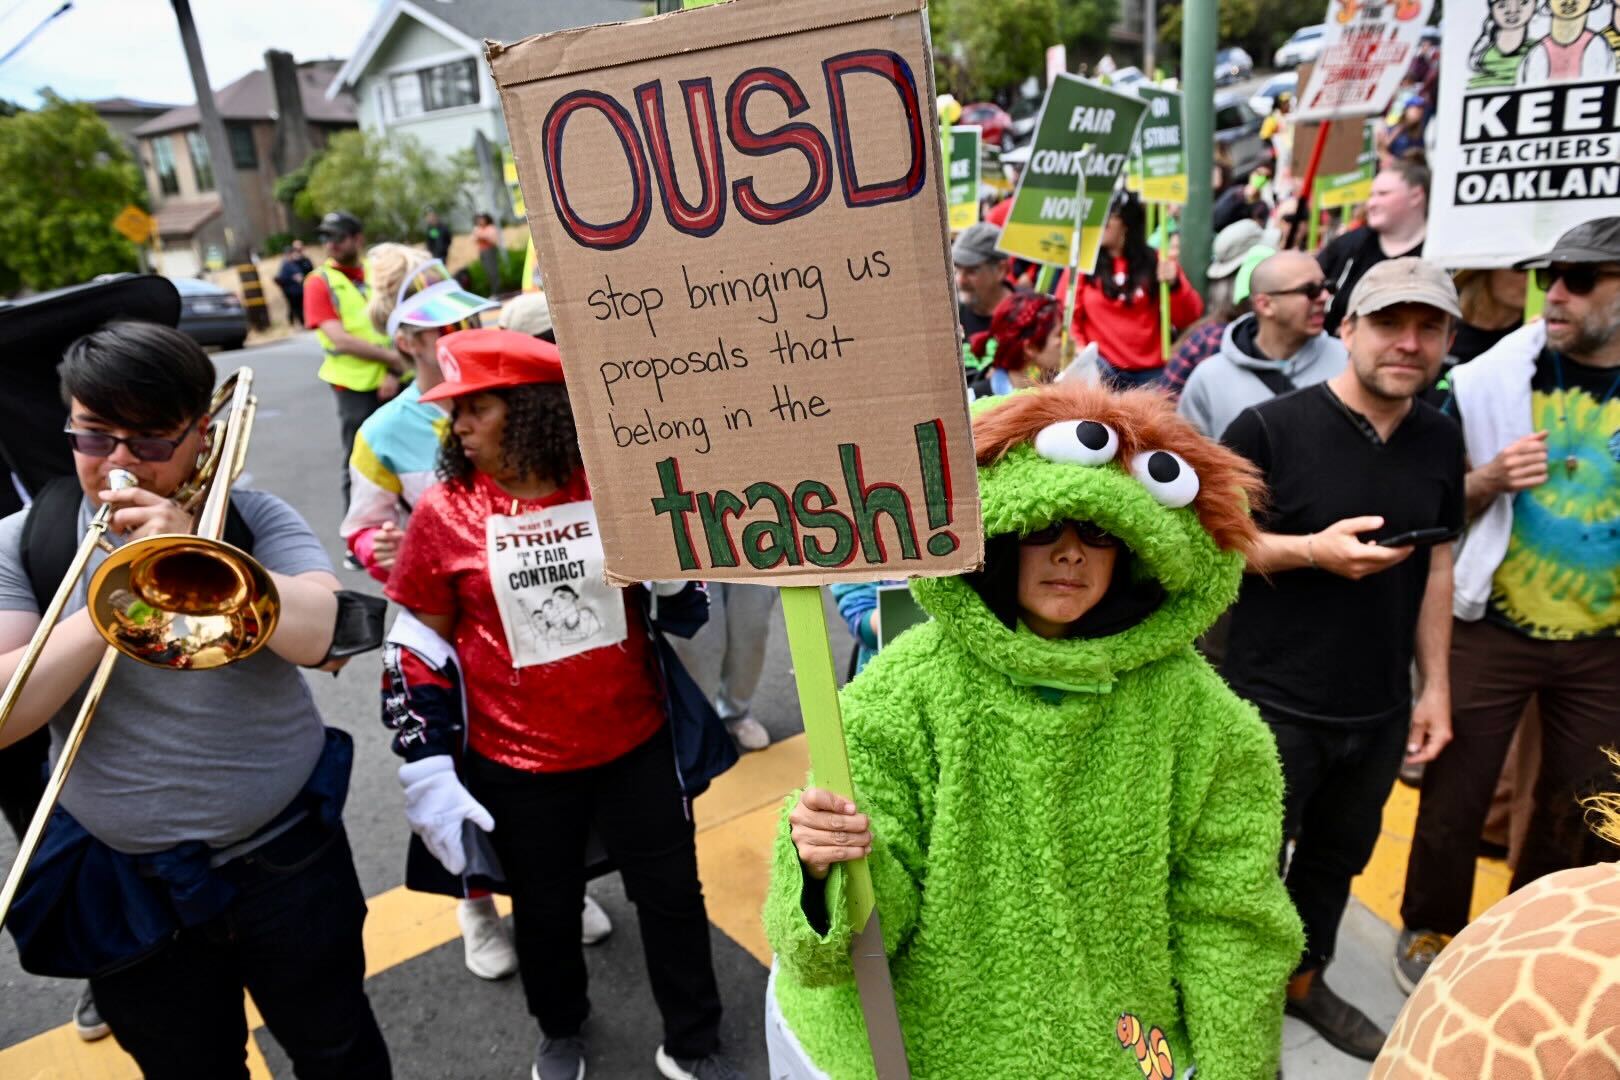 In the foreground is what appears to be a middle school student in a full-body, bright green Oscar the Grouch costume, with a fuzzy brown unibrow, big googly eyes, and the person's face inside the mouth, holding a cardboard sign on a flat wooden stick that says, 'OUSD, Stop bringing us proposals that belong in the trash!' Oscar is in a crowd of people in a street, including someone to their right playing a trombone.